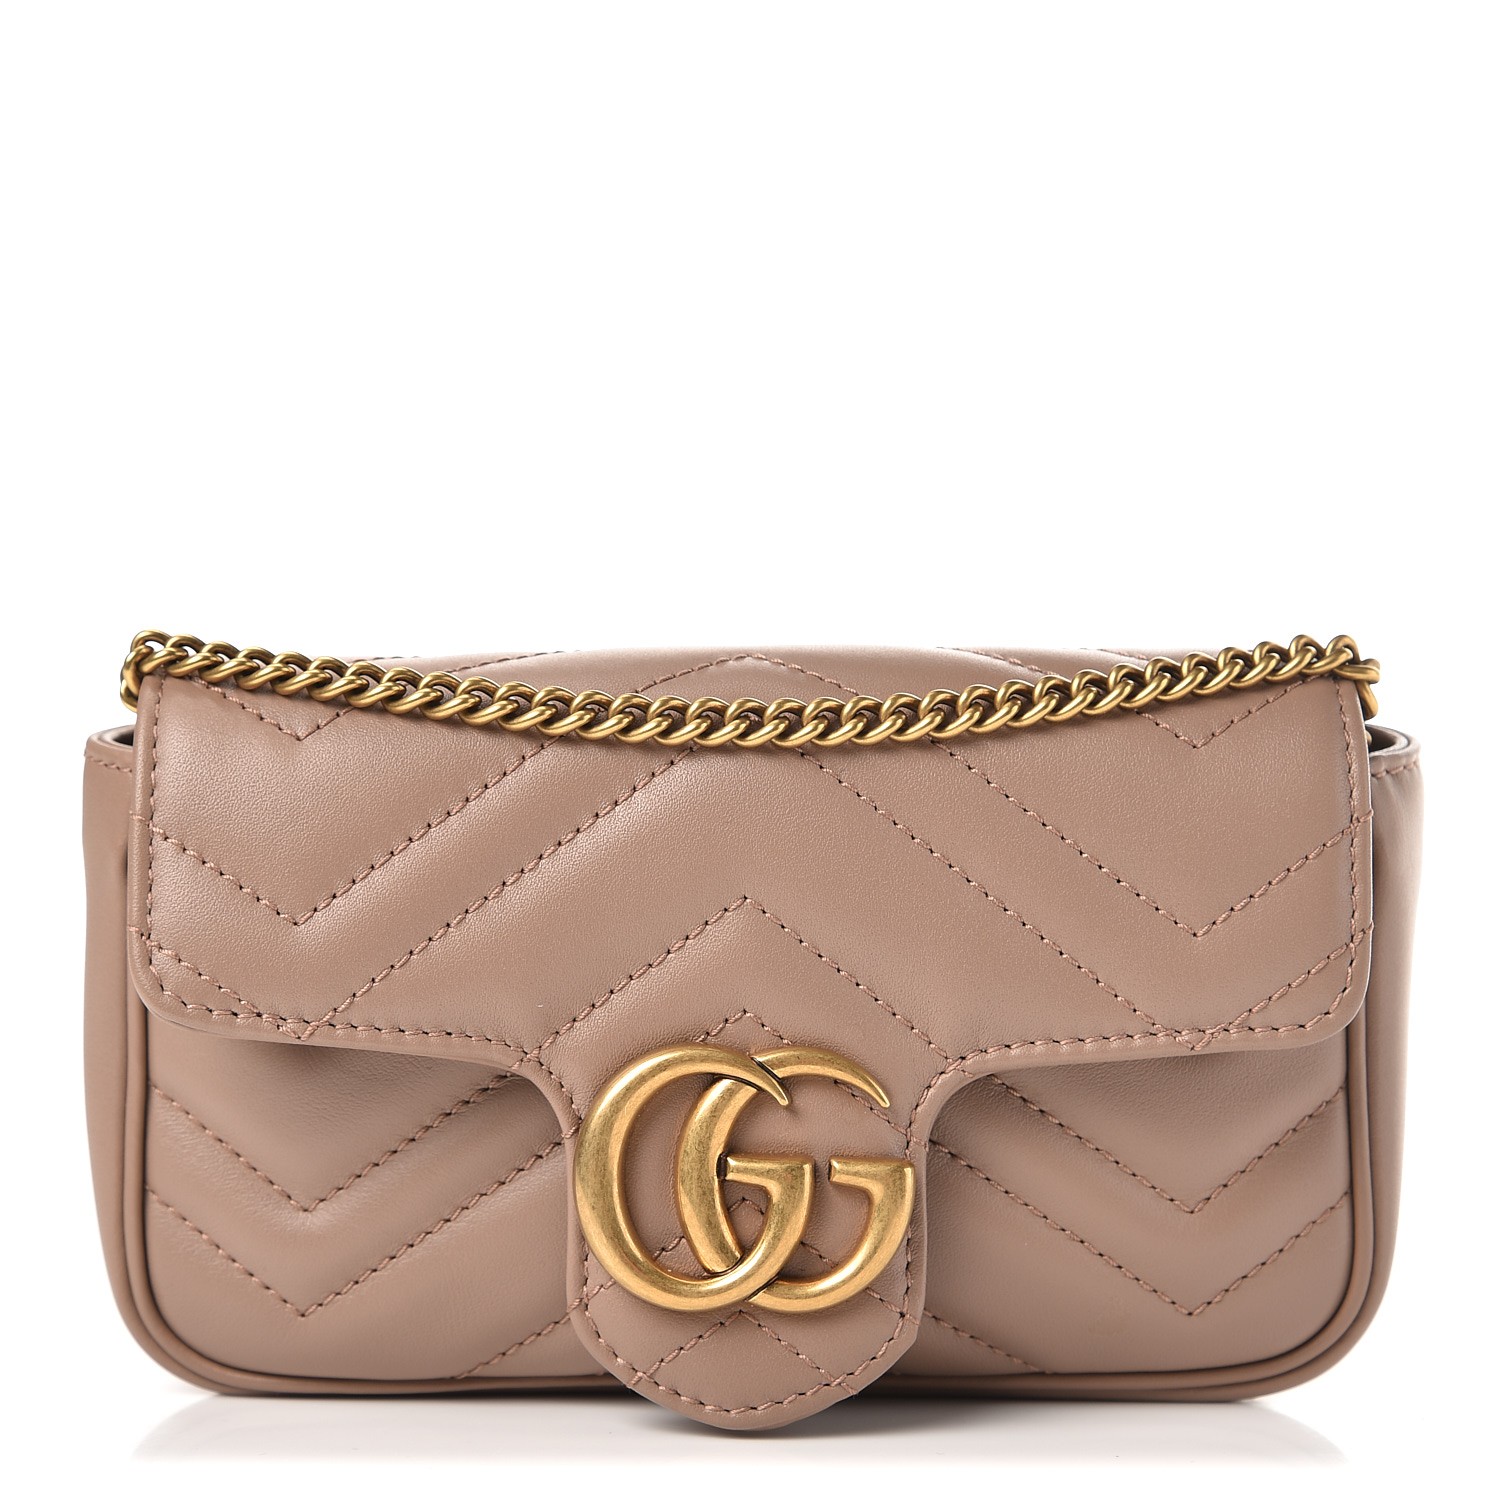 Gucci 476433 Outlet, 53% OFF | lagence.tv